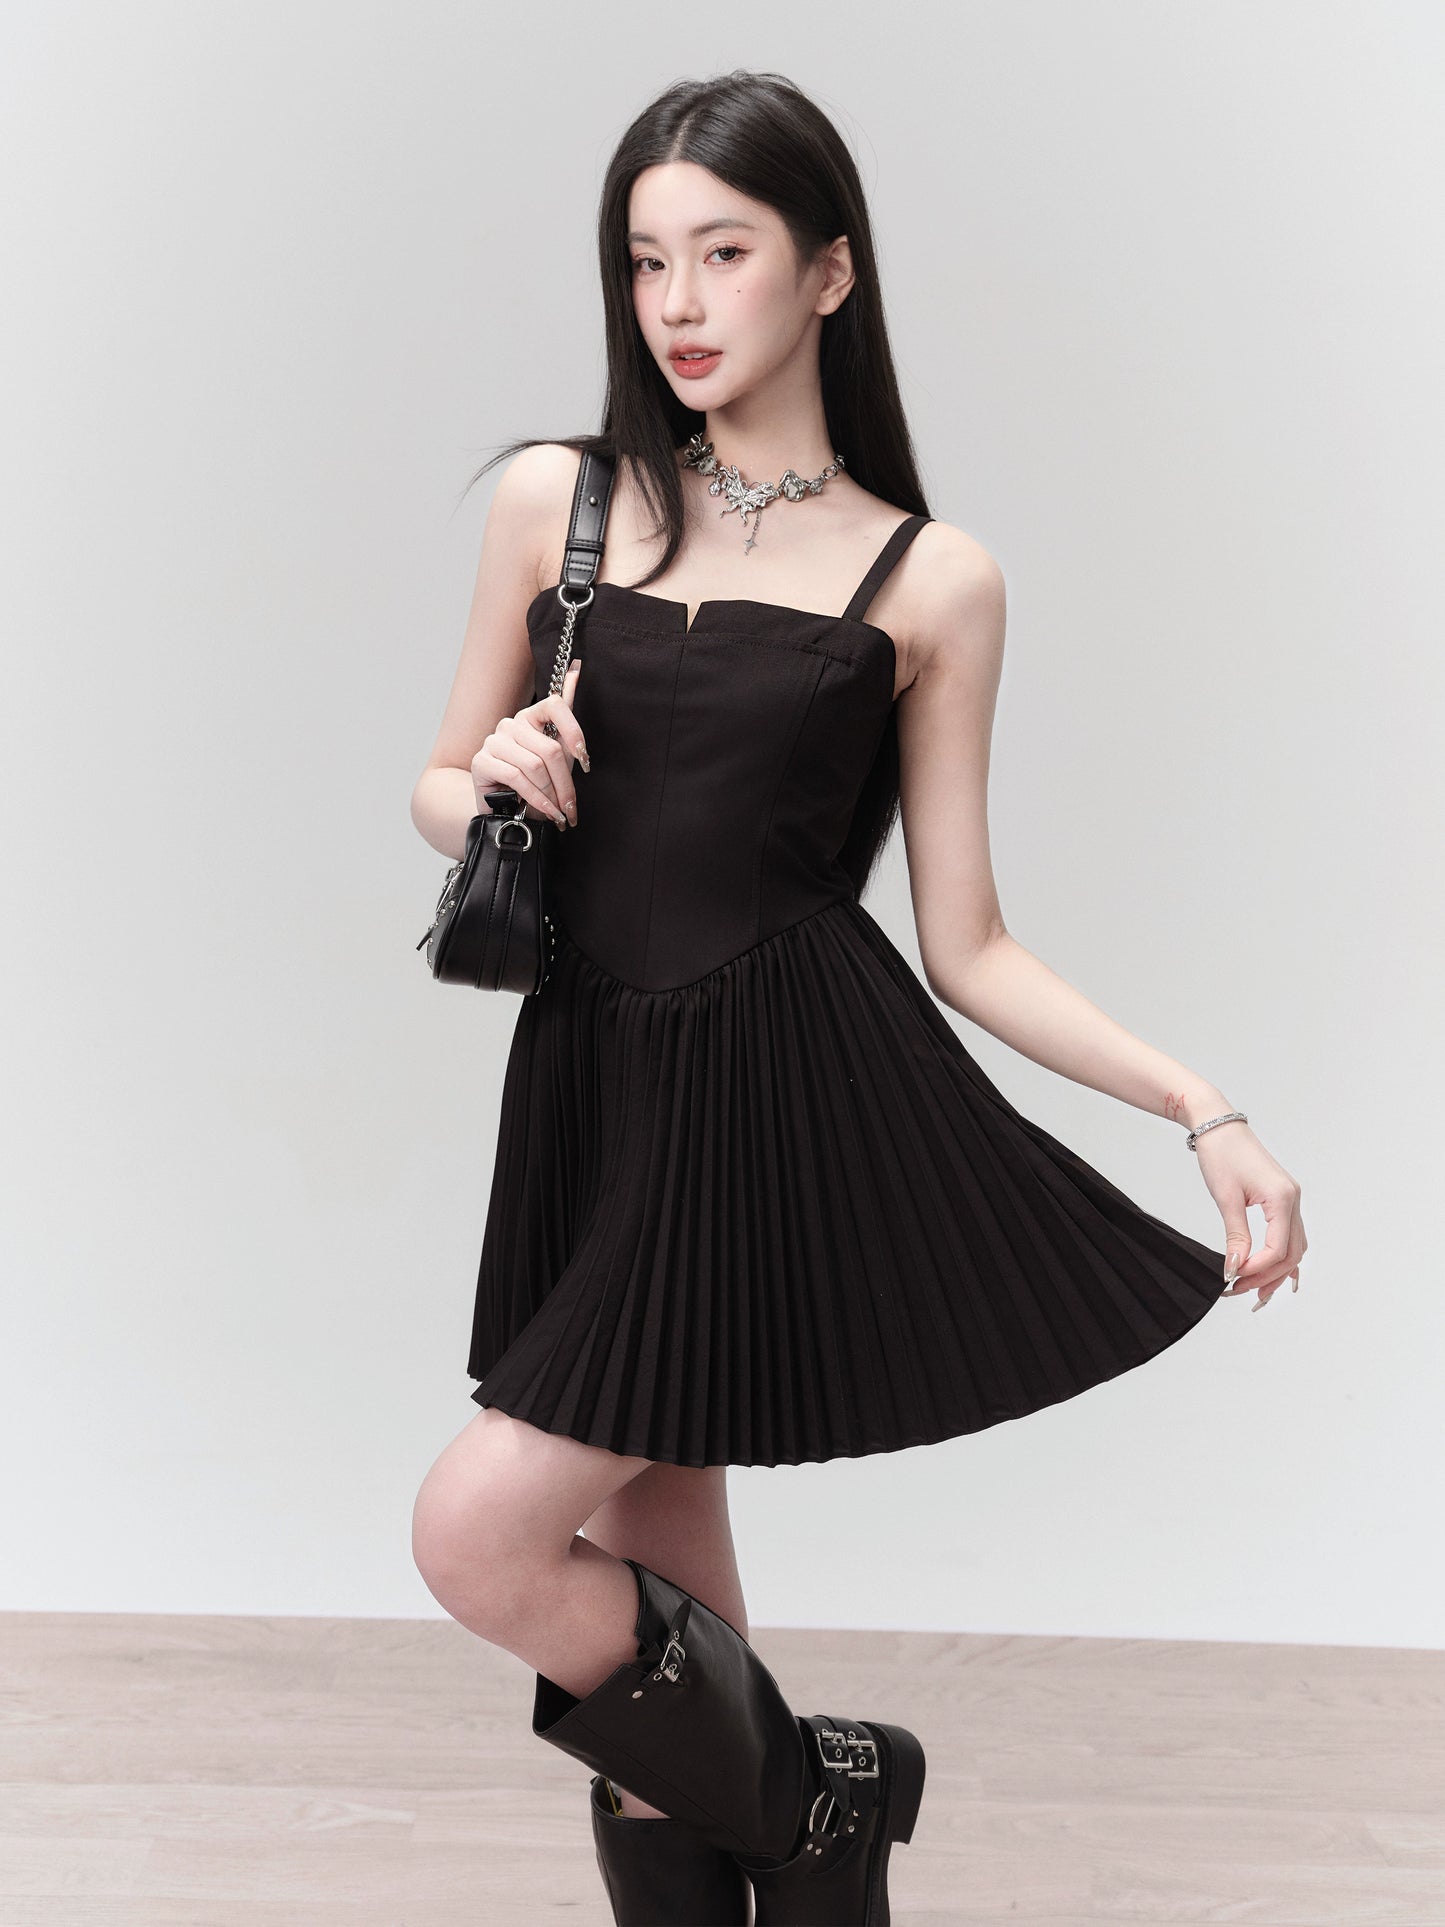 Spot] Fragile shop silky black clever French sweet pintuck dress early spring date slip dress